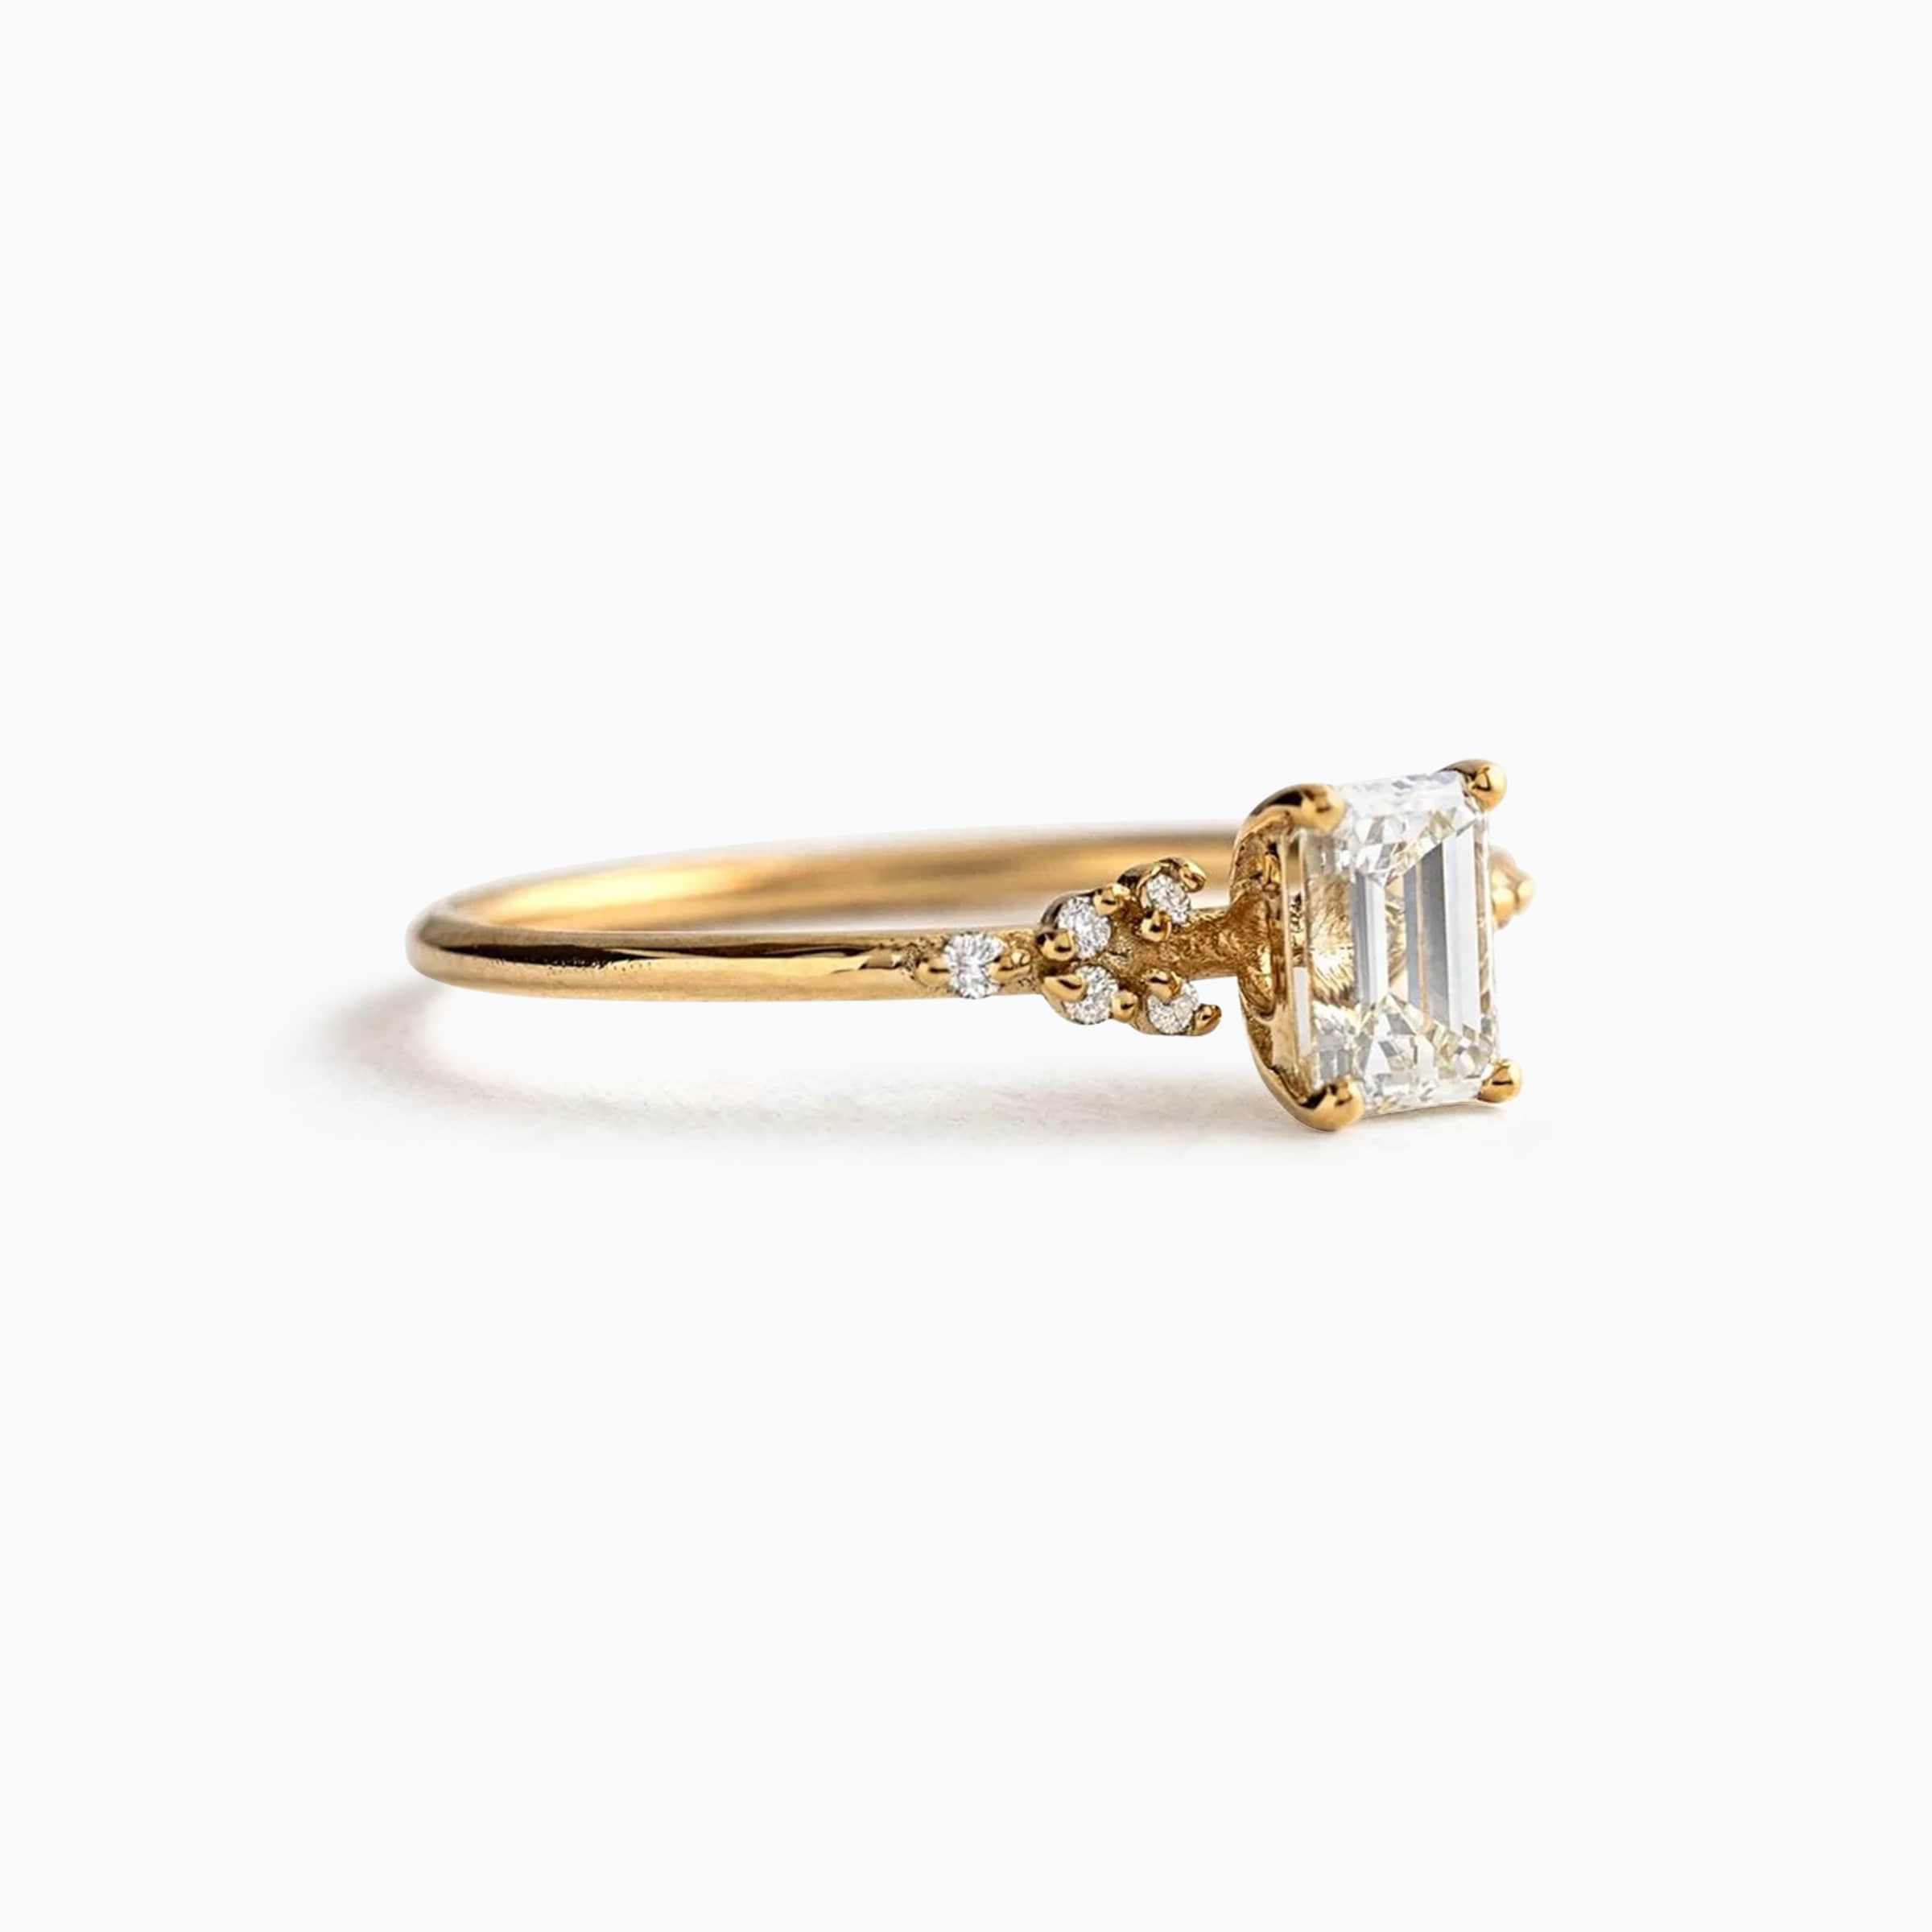 Darry Ring antiuqe emerald cut engagement ring yellow gold in side view